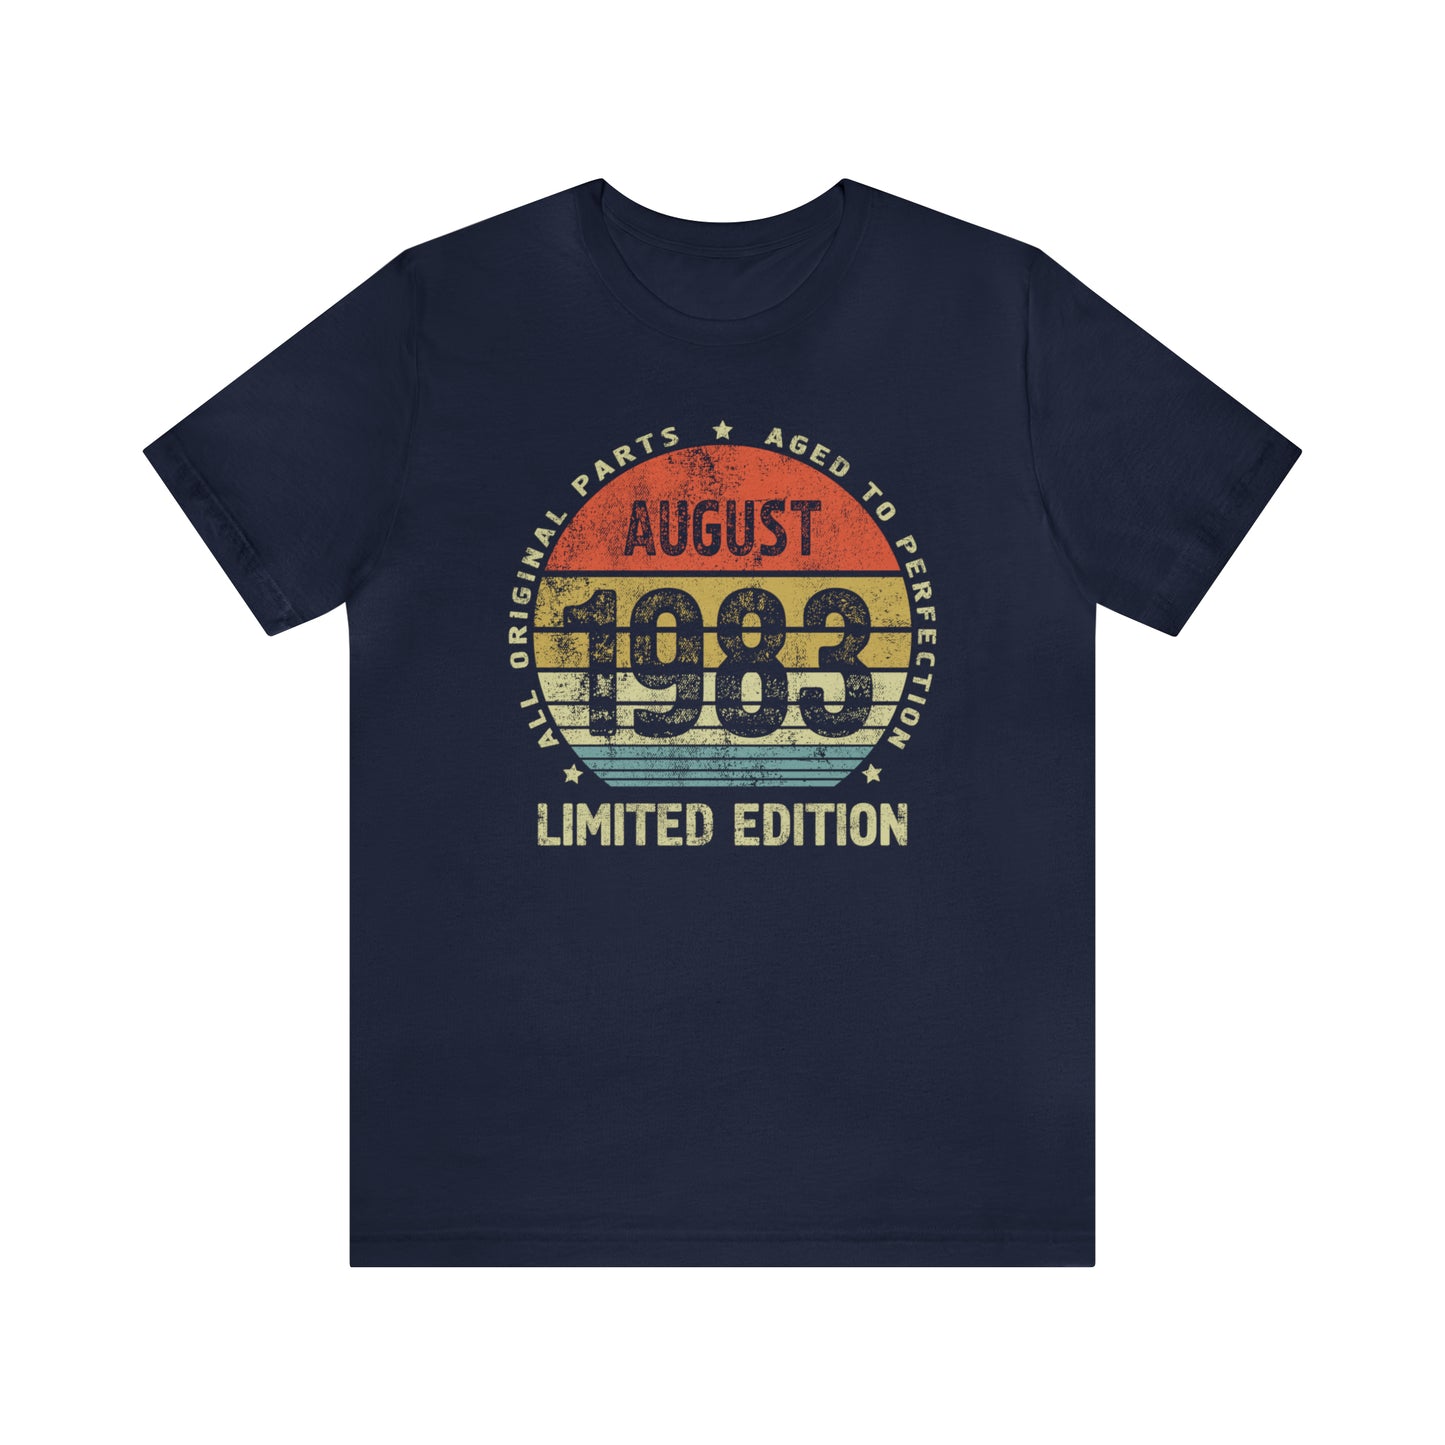 August 1983 birthday Shirt for men or women, Vintage gift shirt for wife or husband, Aged to perfection